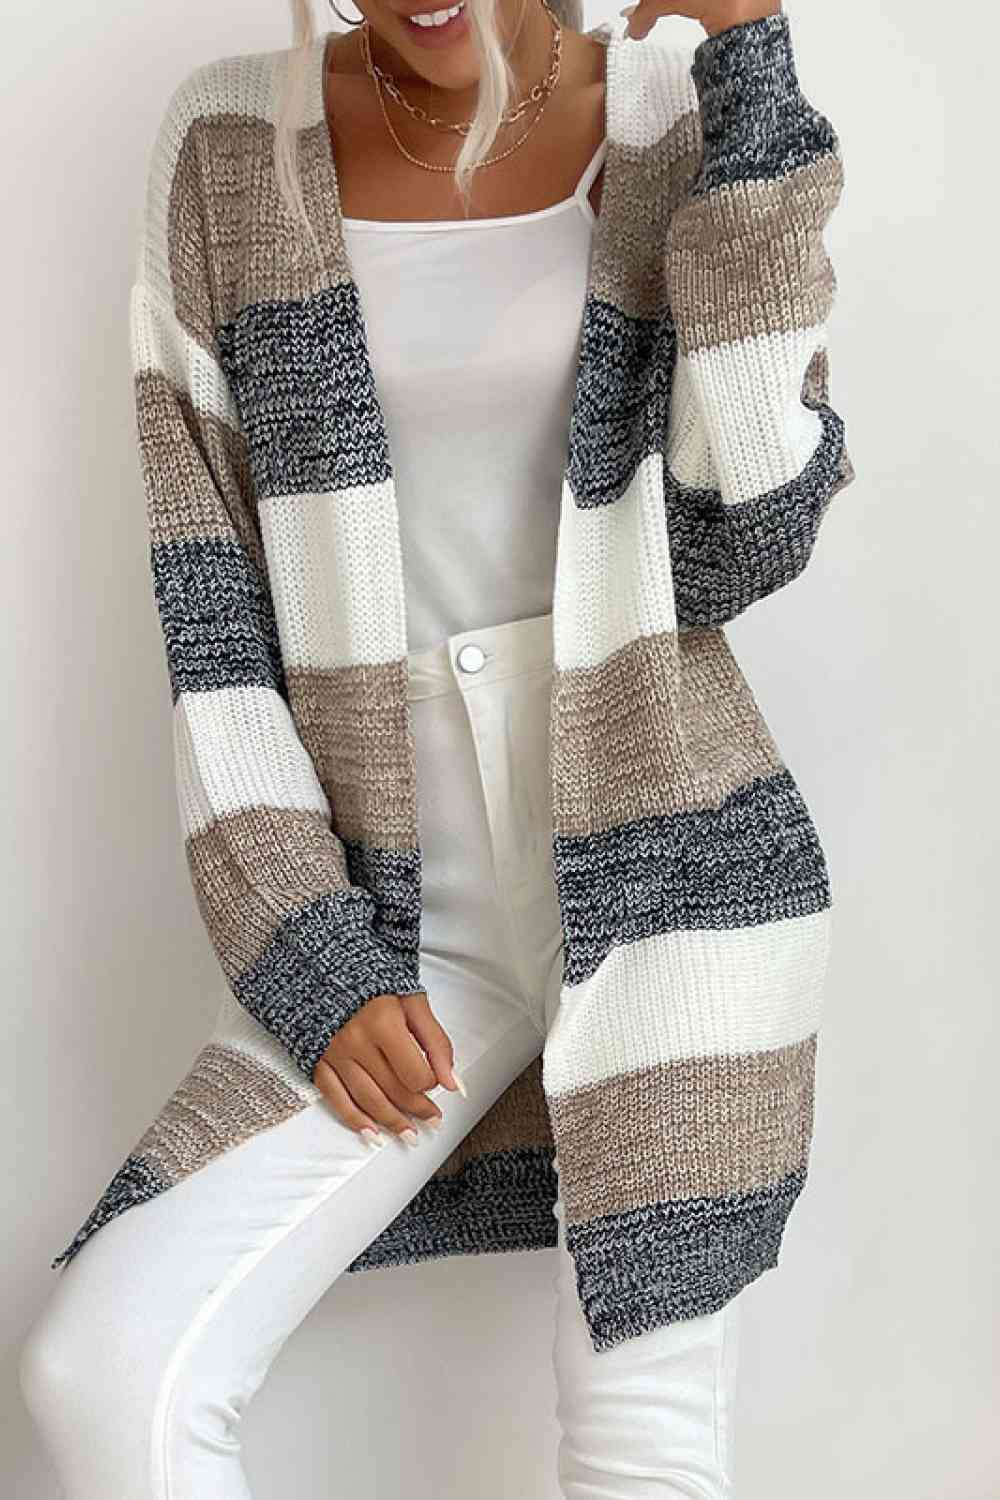 Striped Long Sleeve Duster Cardigan (5 Colors)  Krazy Heart Designs Boutique Khaki/Dark Gray/White S 